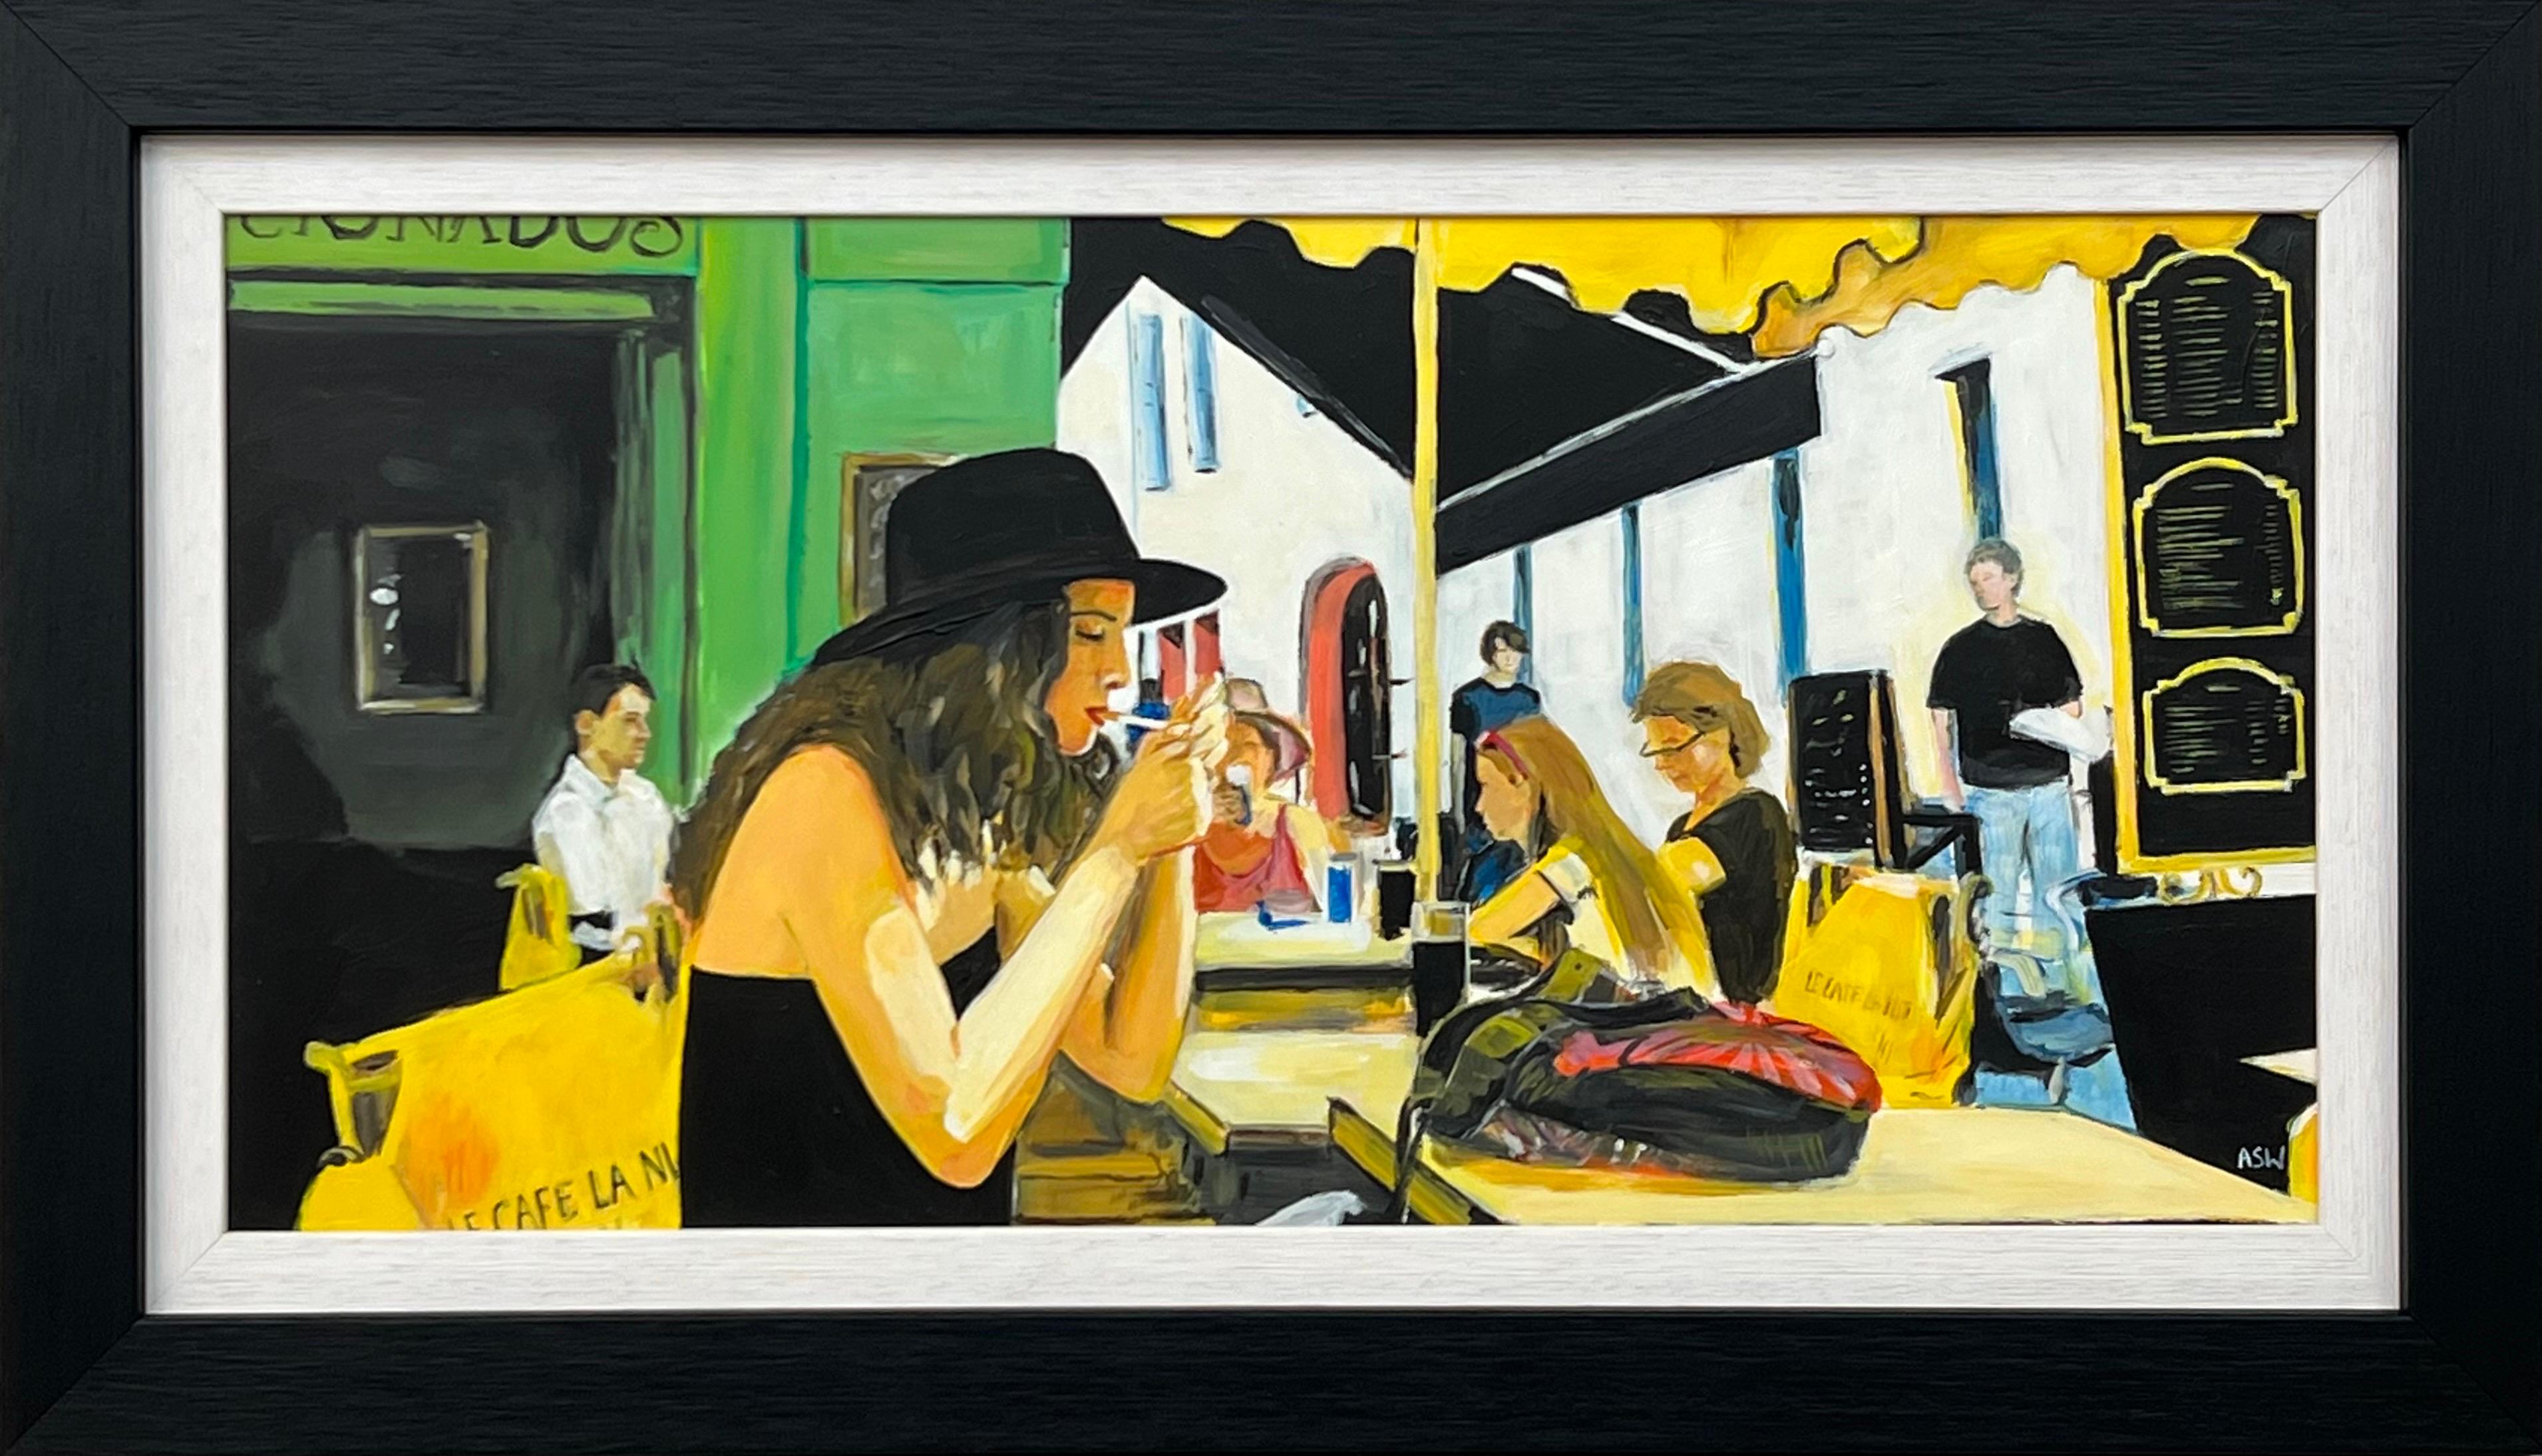 Angela Wakefield Figurative Painting - Woman Smoking at Le Cafe La Nuit in Arles, France by Contemporary British Artist